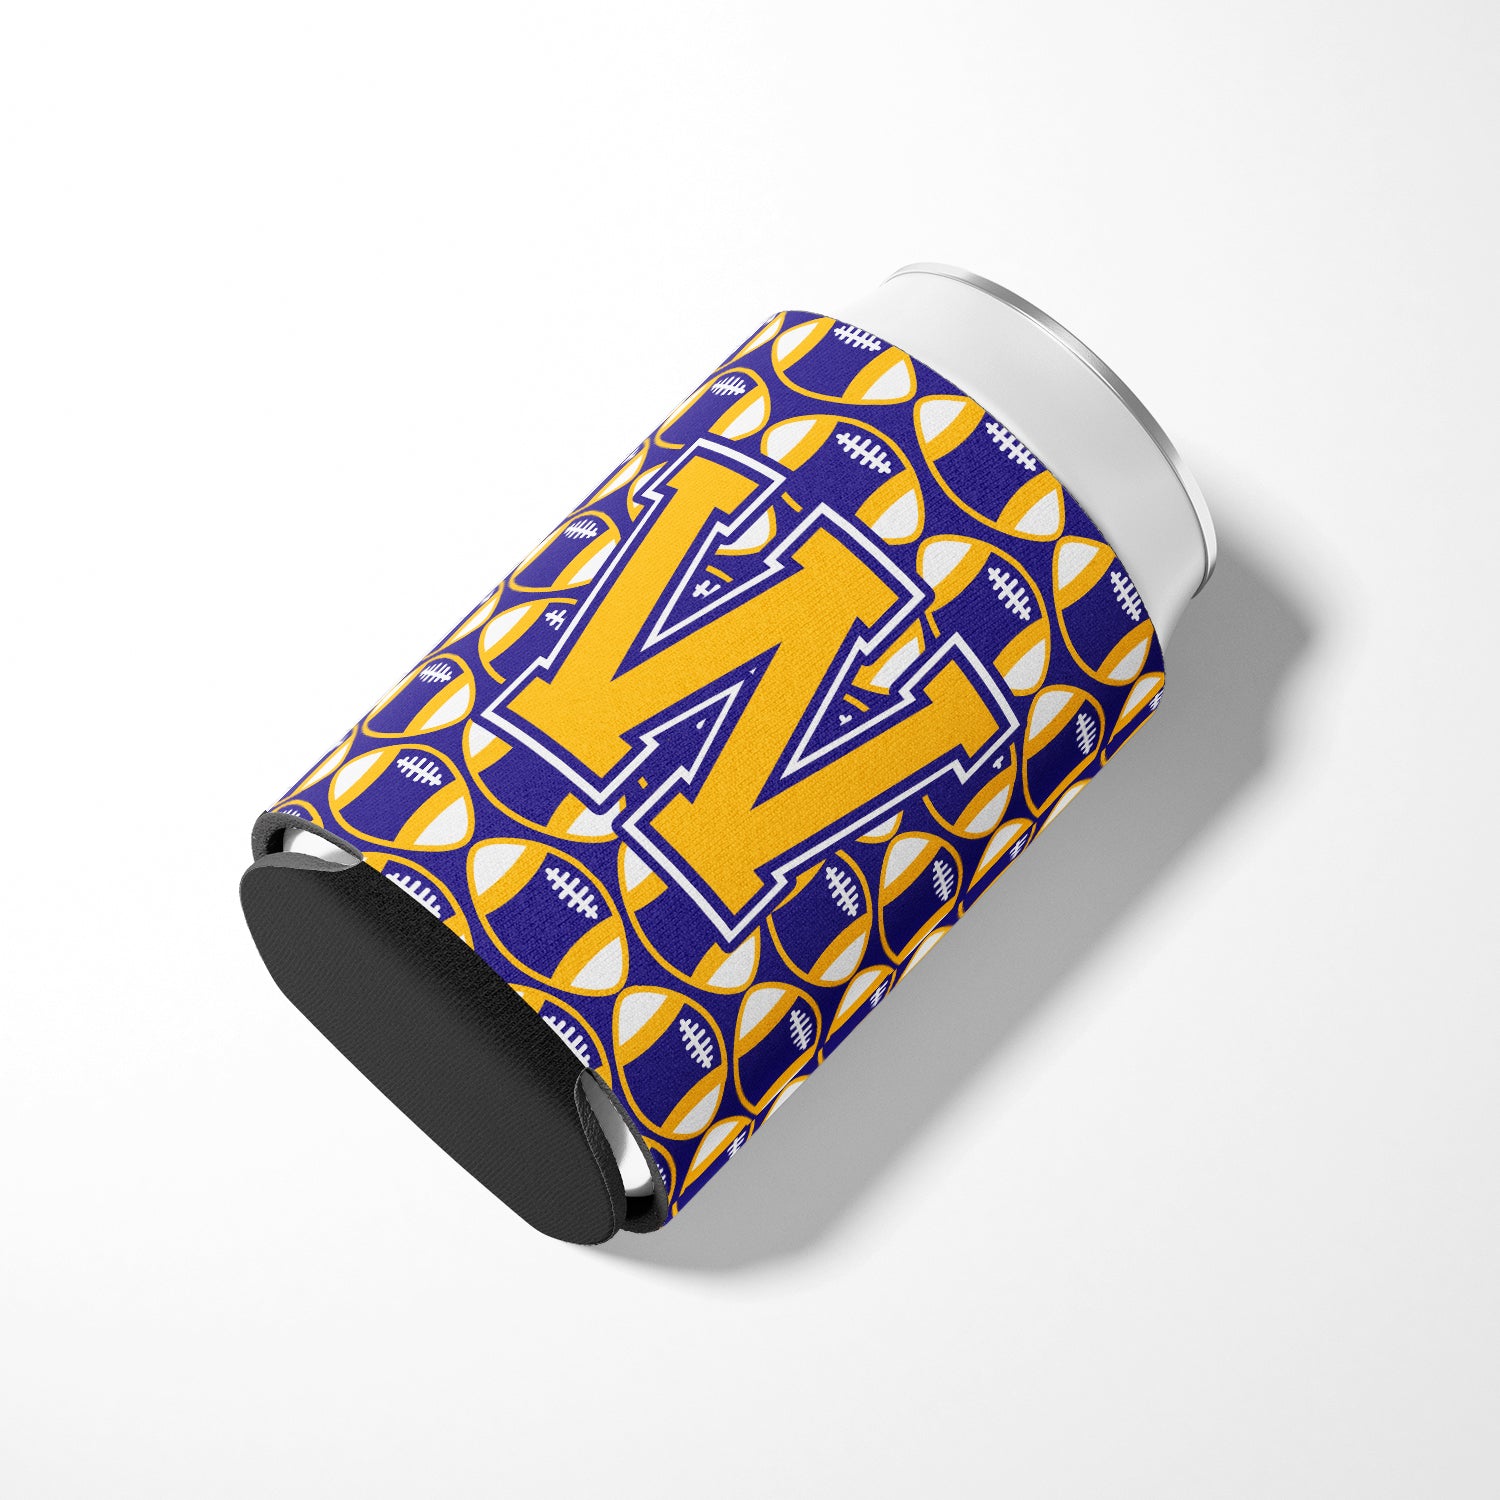 Letter W Football Purple and Gold Can or Bottle Hugger CJ1064-WCC.